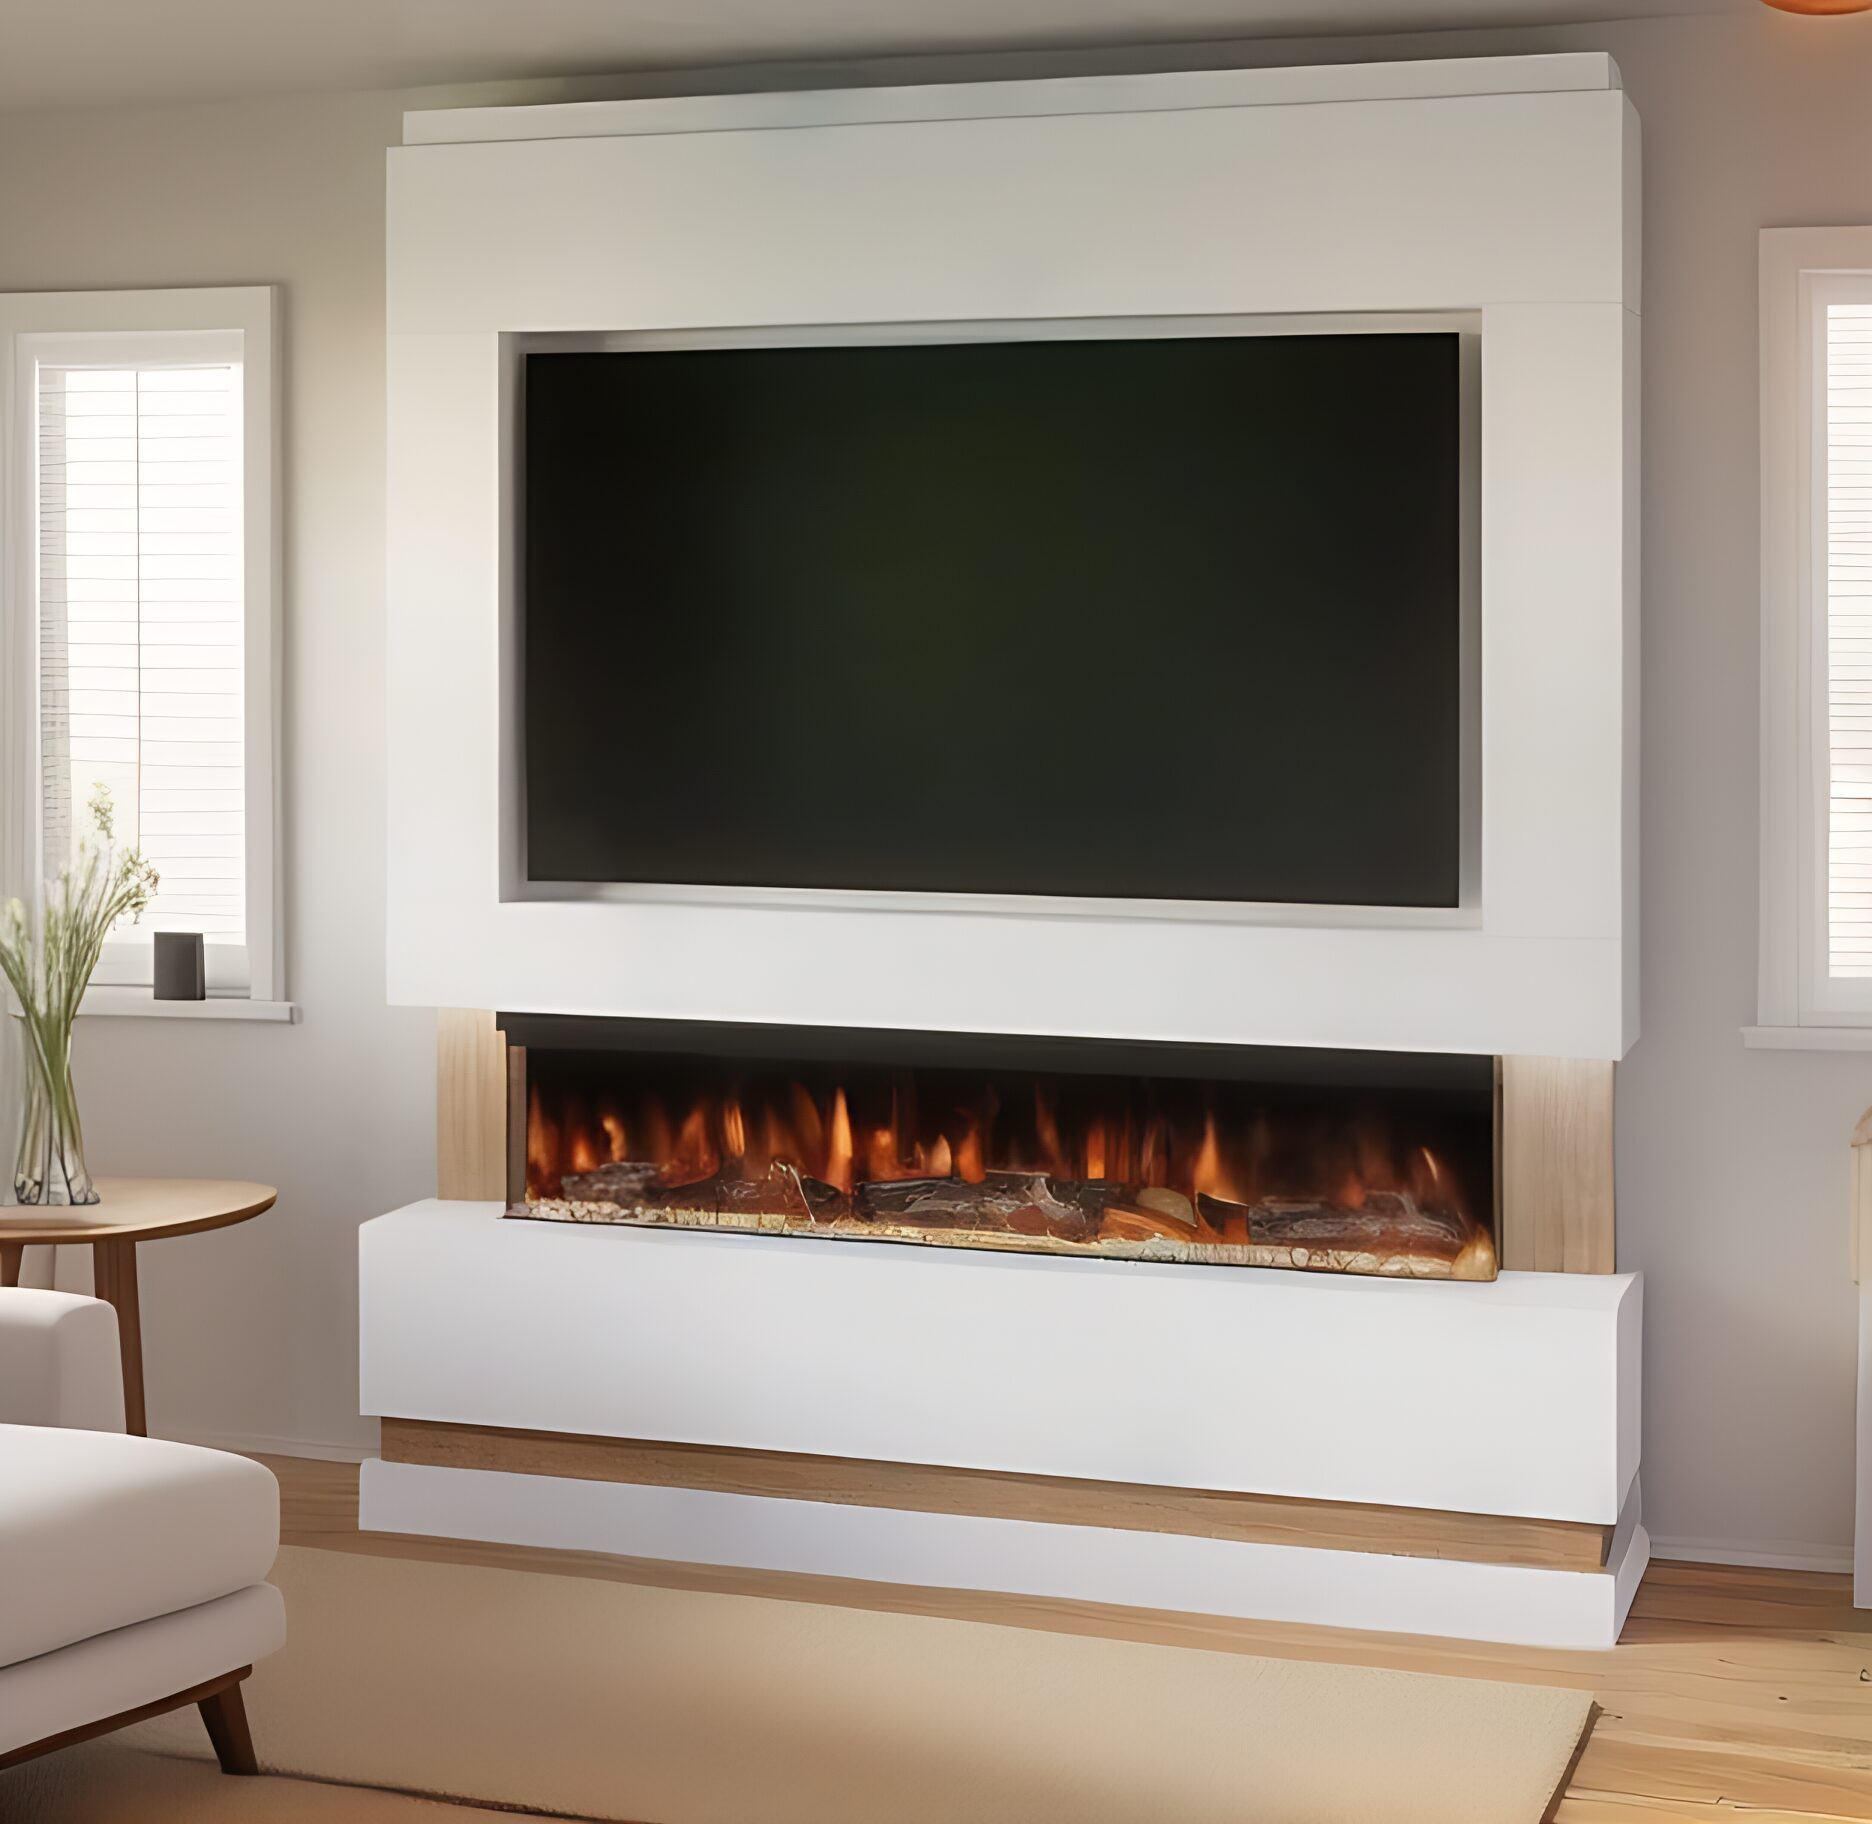 media wall with fireplace and television mount